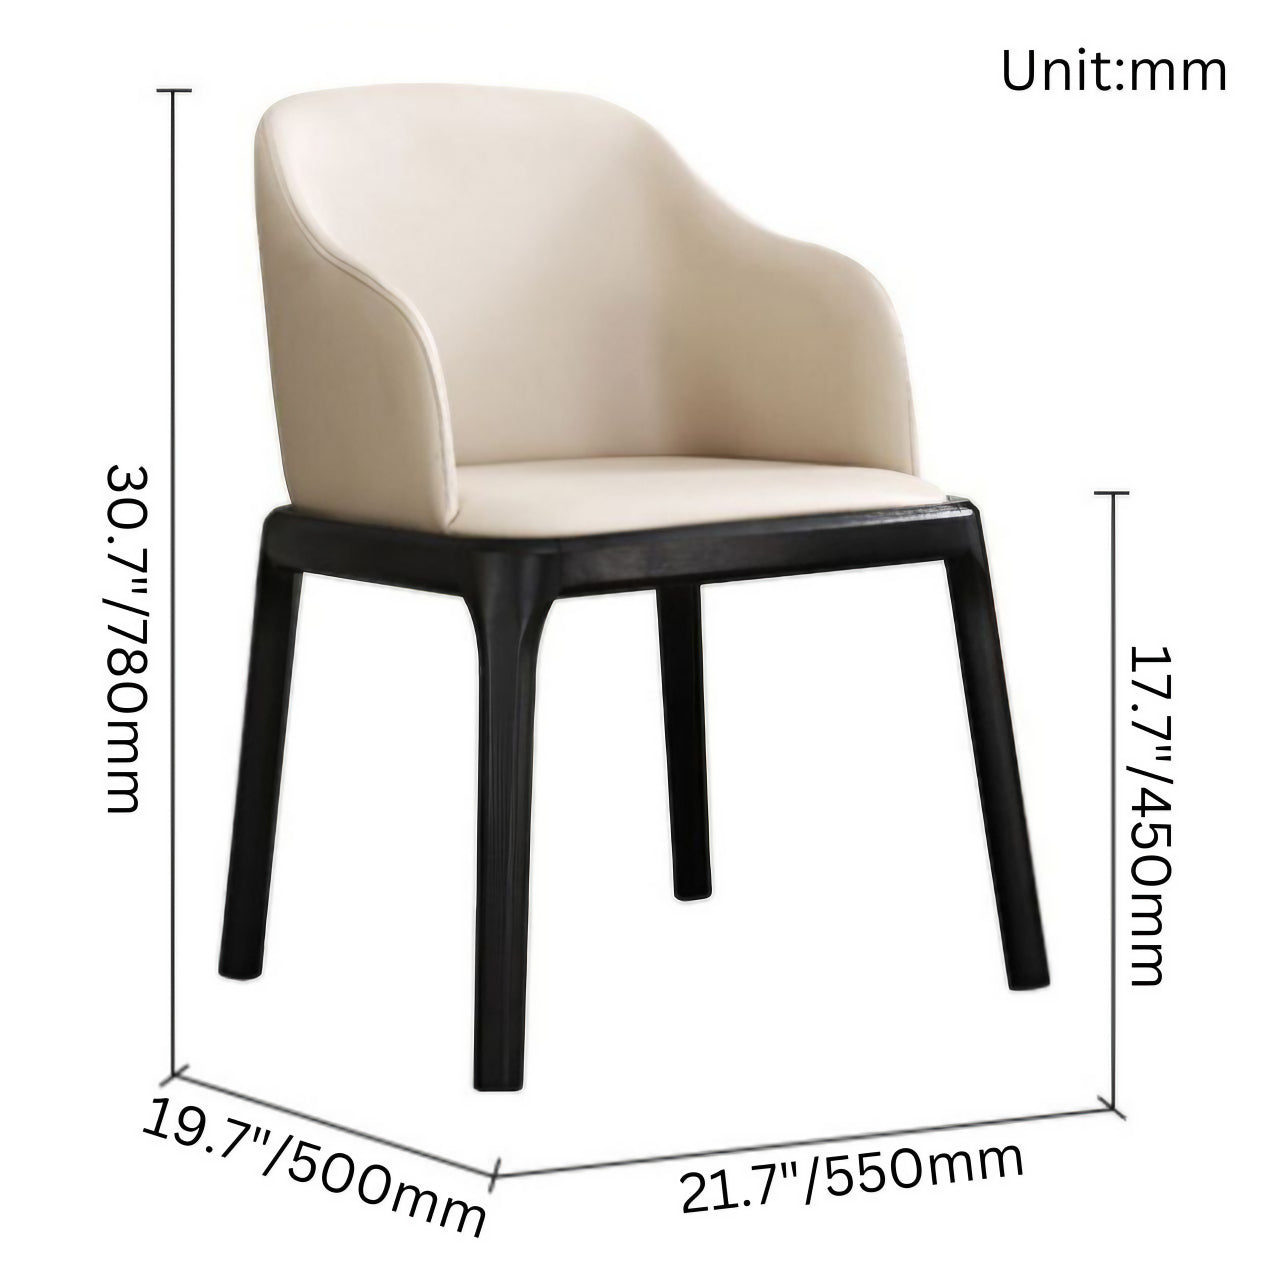 Stylish coffee brown leather single dining chair with durable whitewax wood frame for modern dining setup